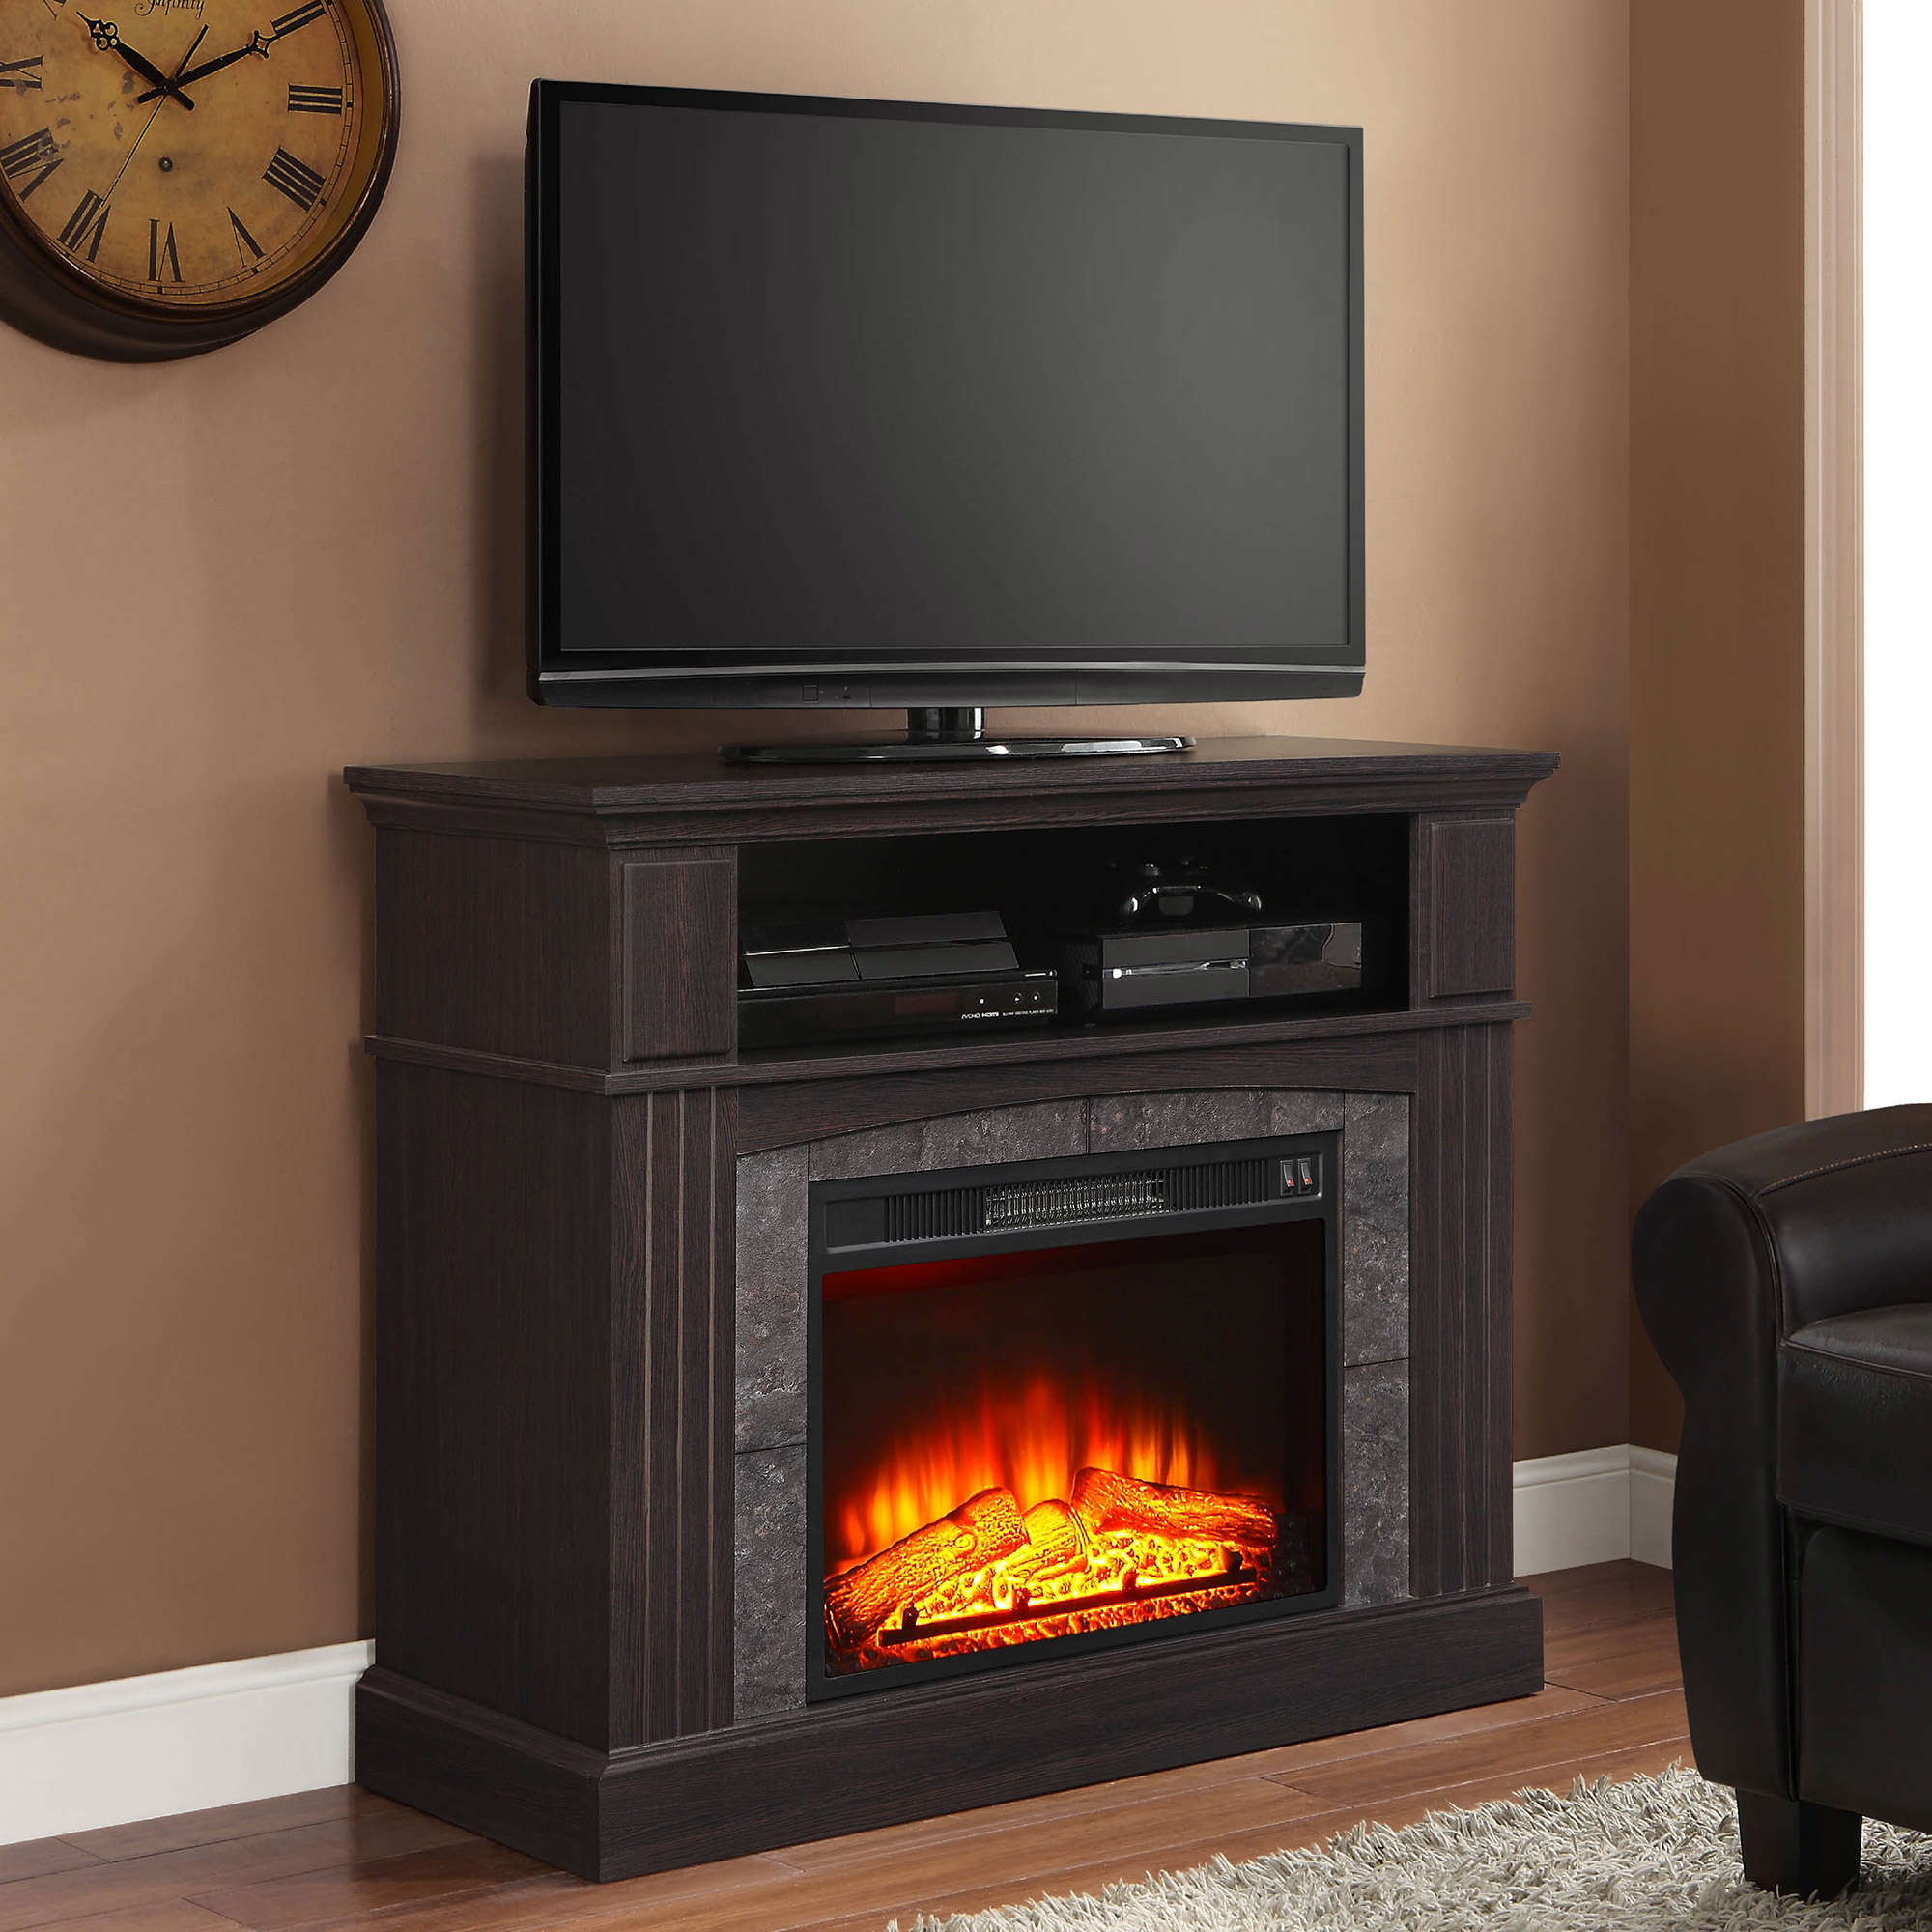 Whalen Media Fireplace for Your Home Television Stand fits TVs up to 50" Espresso Finish - image 1 of 5